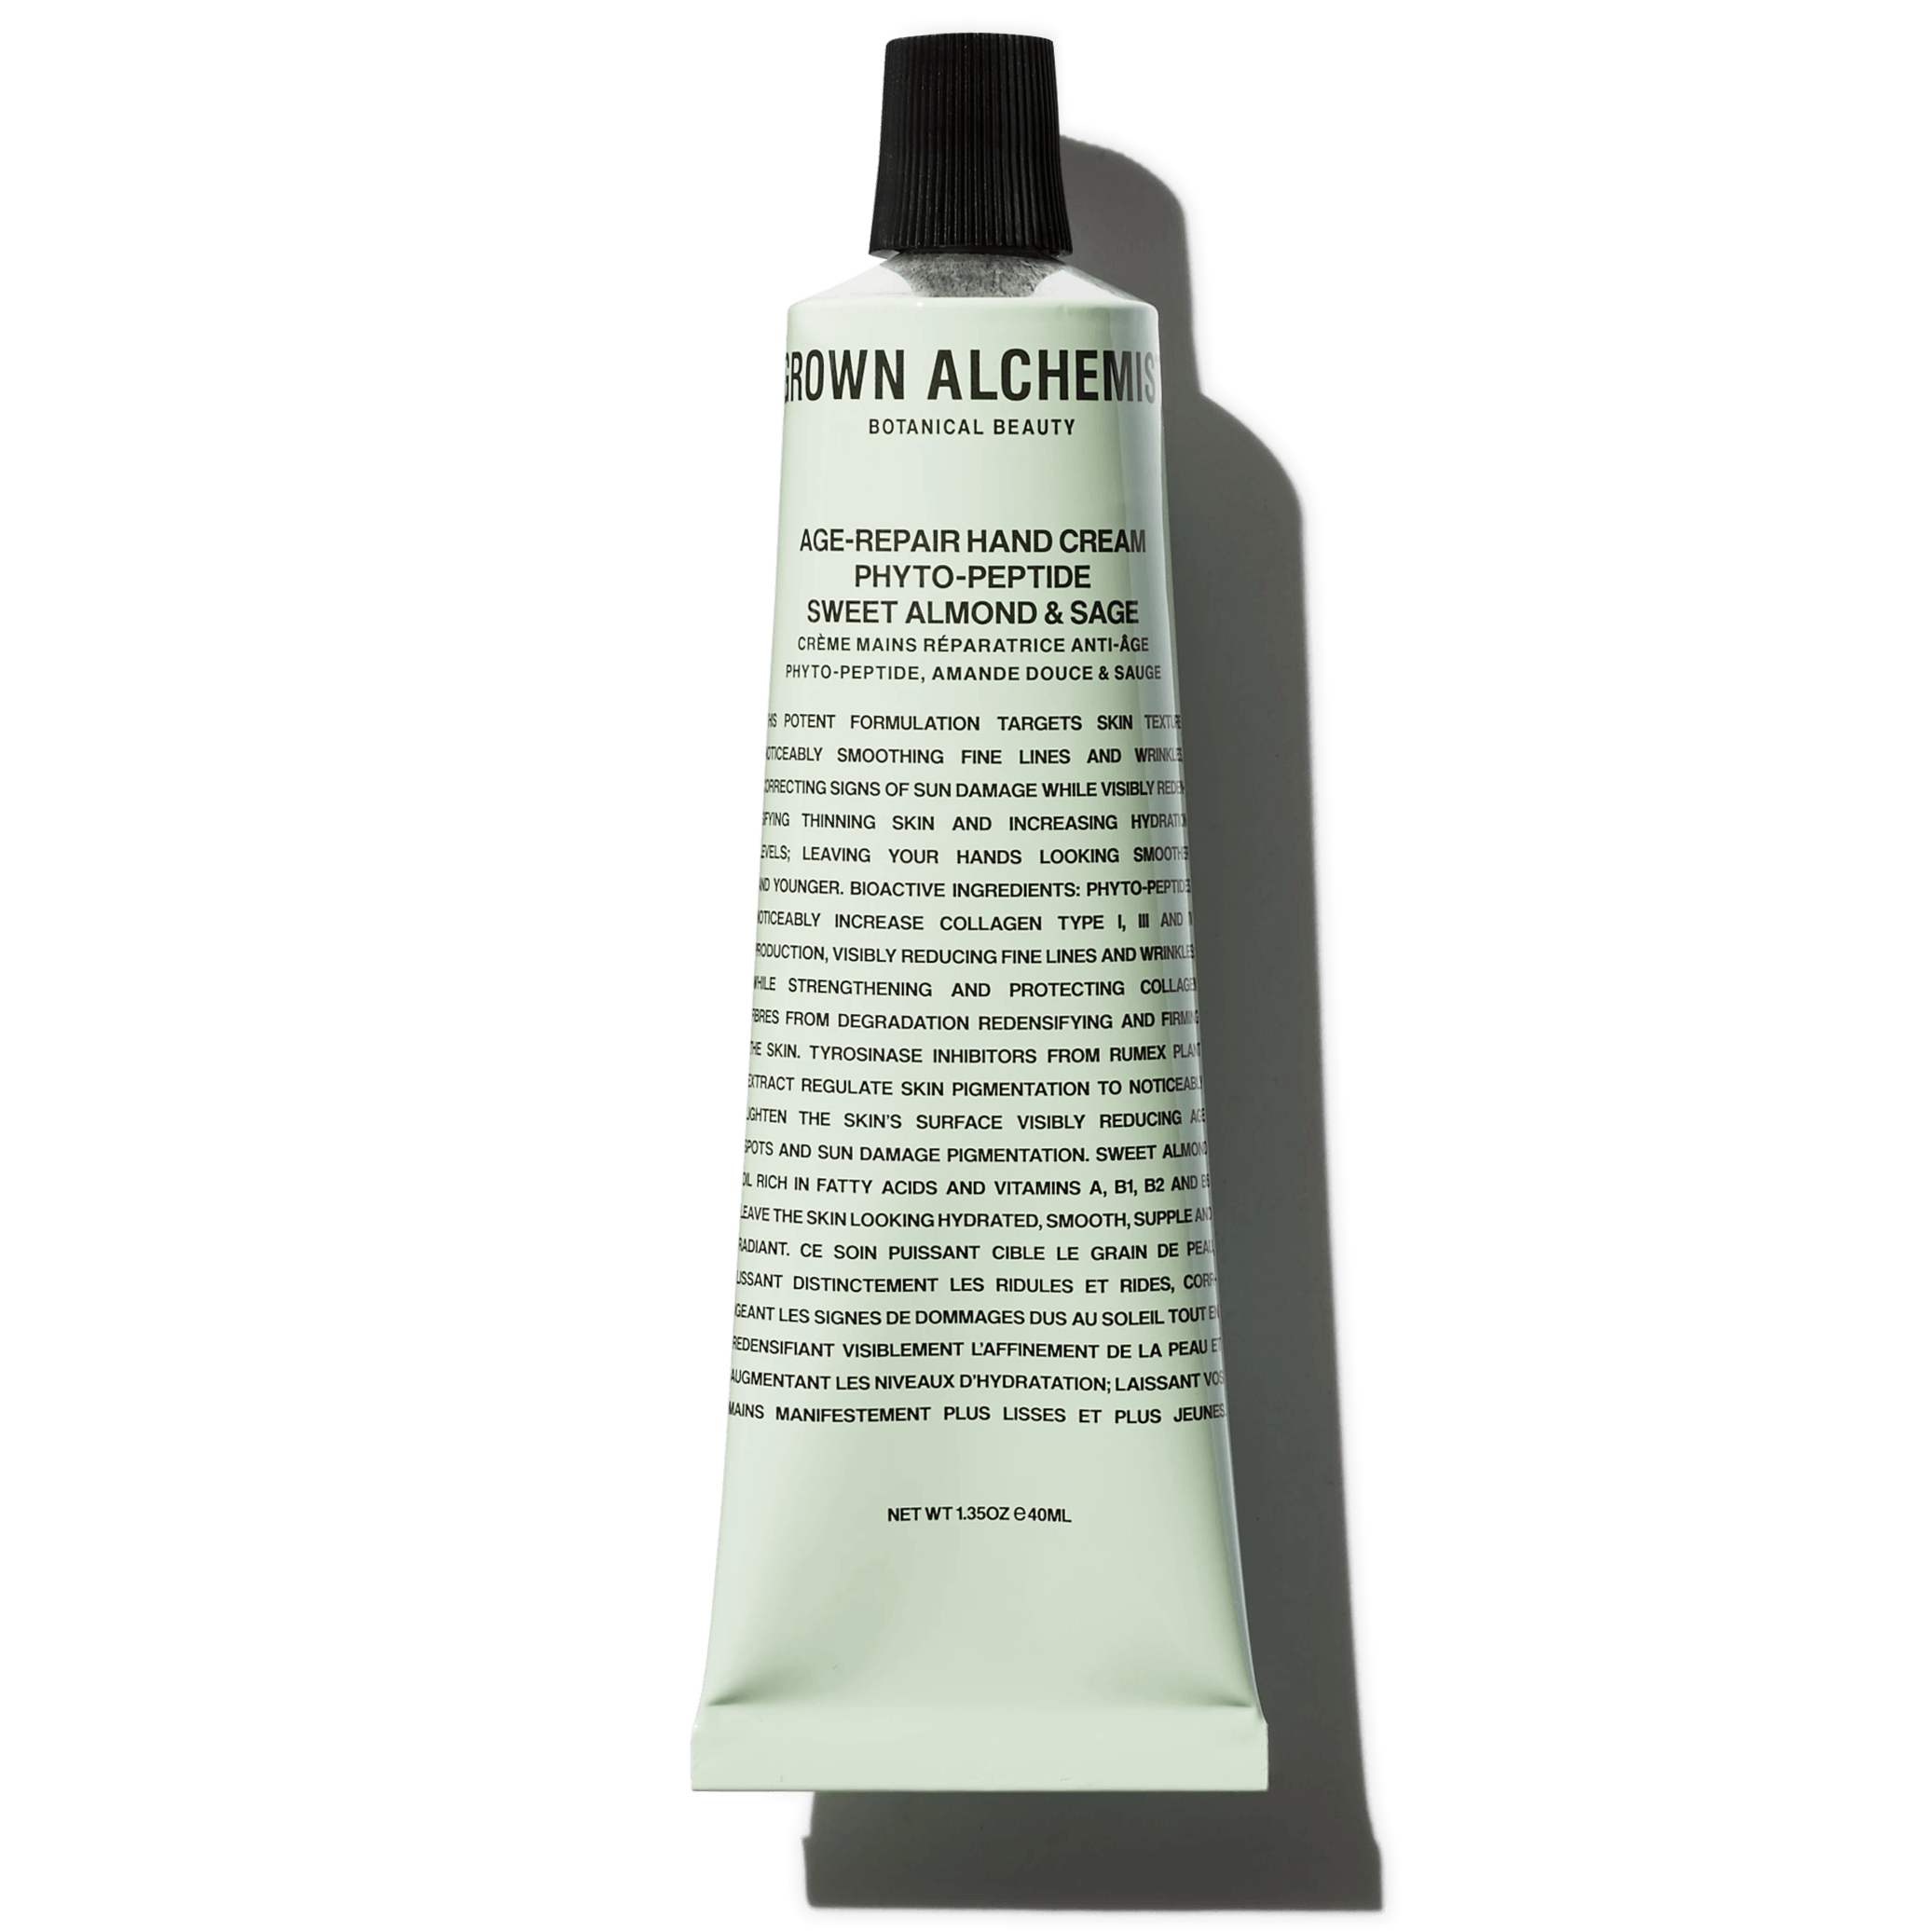 Grown Alchemist Age-Repair Hand Cream: Phyto-Peptide, Sweet Almond, Sage at Socialite Beauty Canada